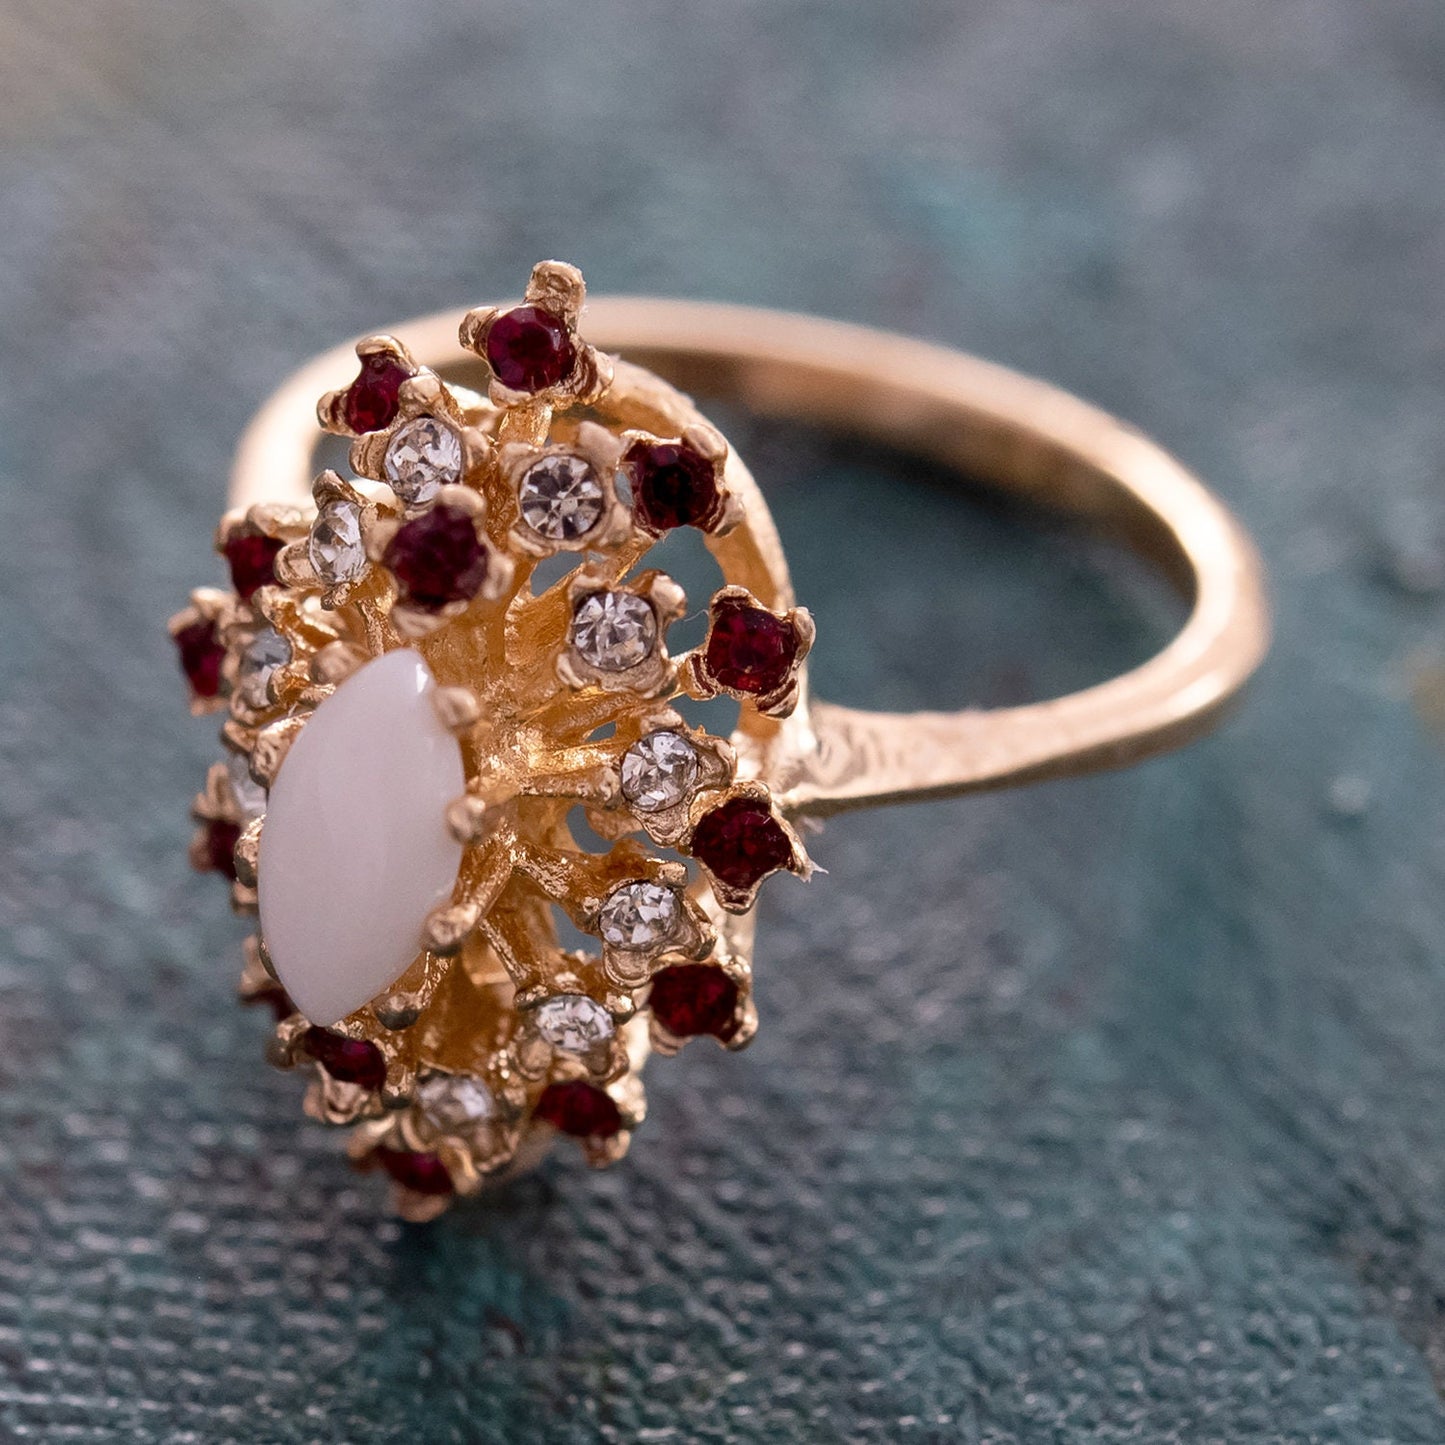 Vintage Ring Genuine Opal Surrounded by Clear and Ruby Swarovski Crystal Cocktail Ring 18k Gold Antique R221 - Limited Stock - Never Worn